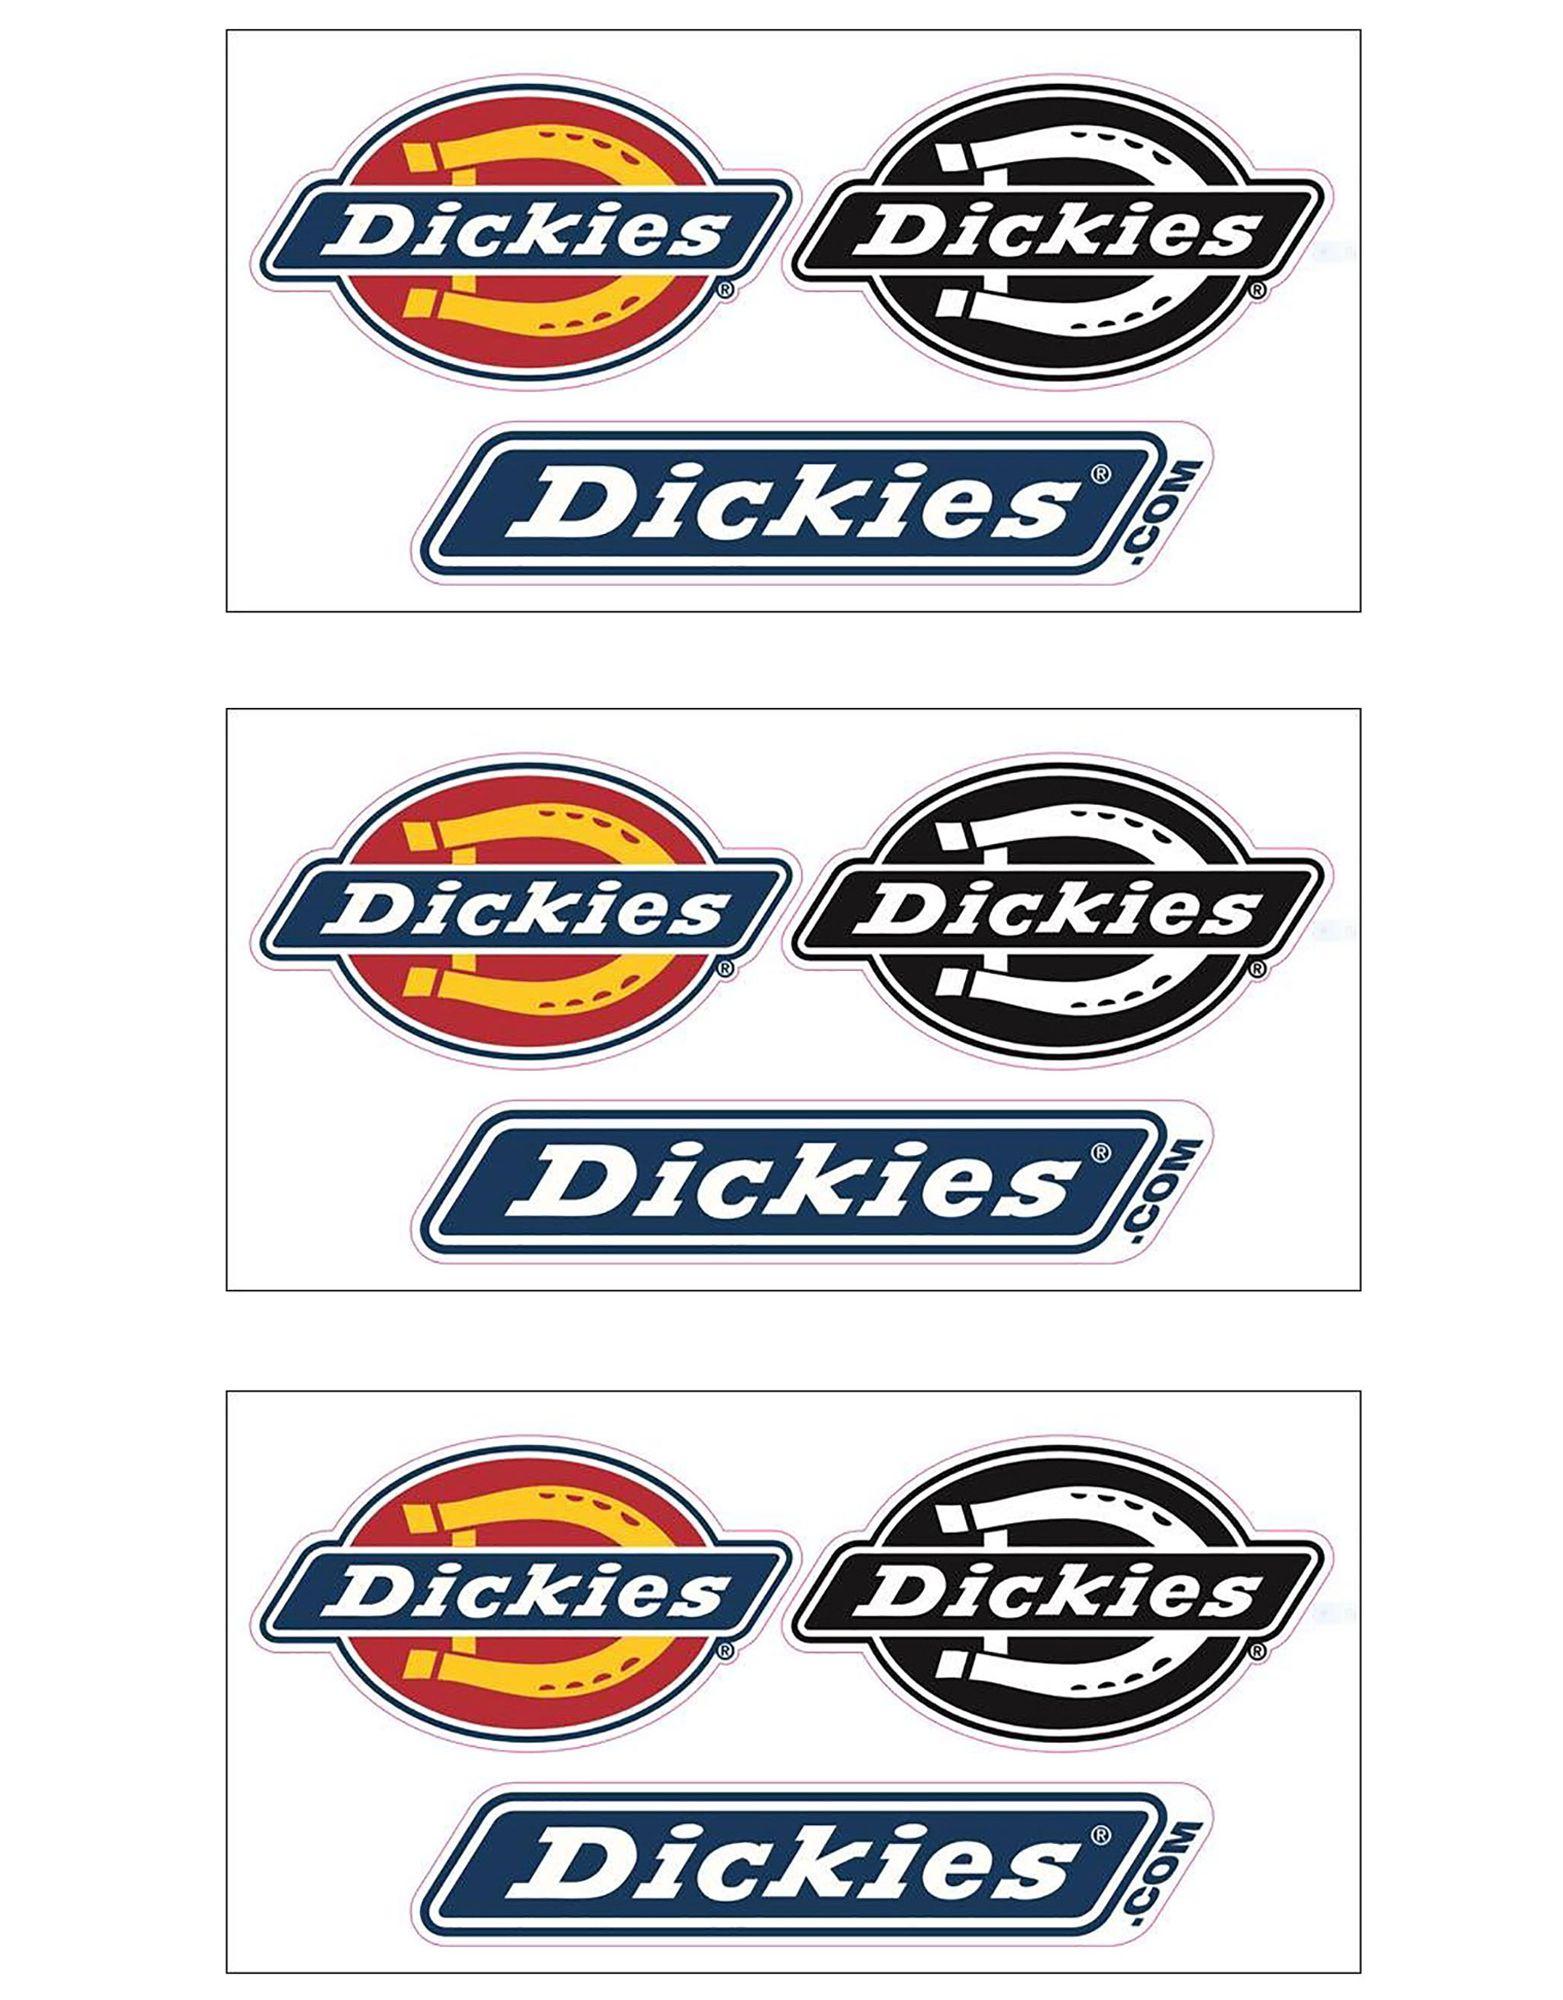 Red White and Yellow Brand Logo - Best Selling Dickies Clothes for Men, Women & Kids, Blue, Red, White ...